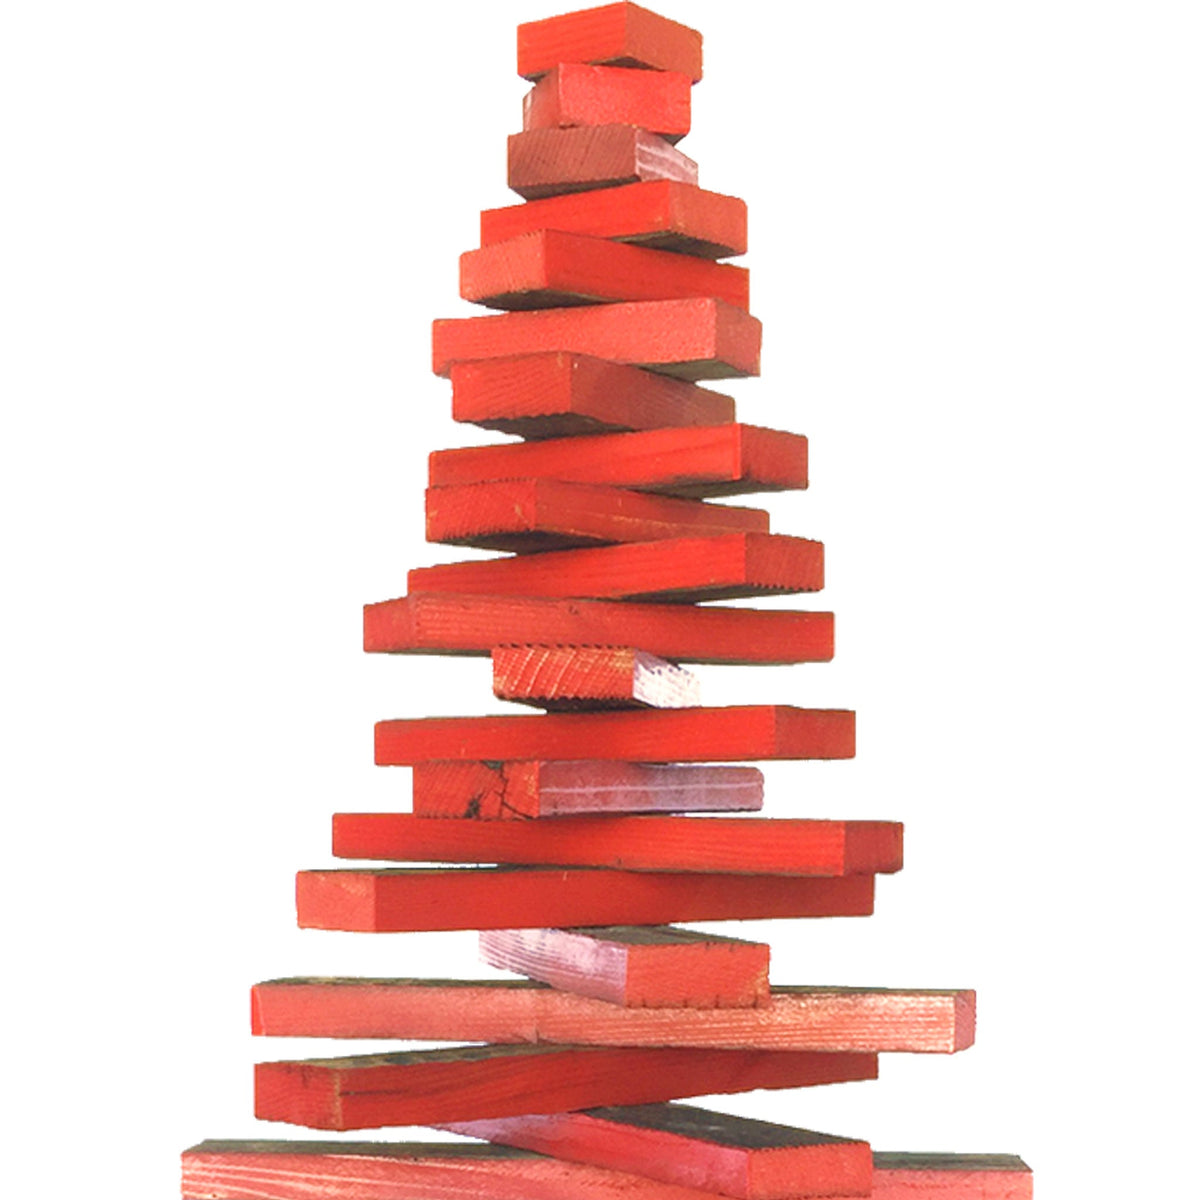 Crafted from reclaimed redwood fence boards and adorned with red highlights, this Christmas tree boasts a 100% recycled and environmentally conscious design. Each branch is meticulously cut to form the perfect Christmas tree shape, while the natural wood grains on both the top and bottom of each branch add an authentic touch.